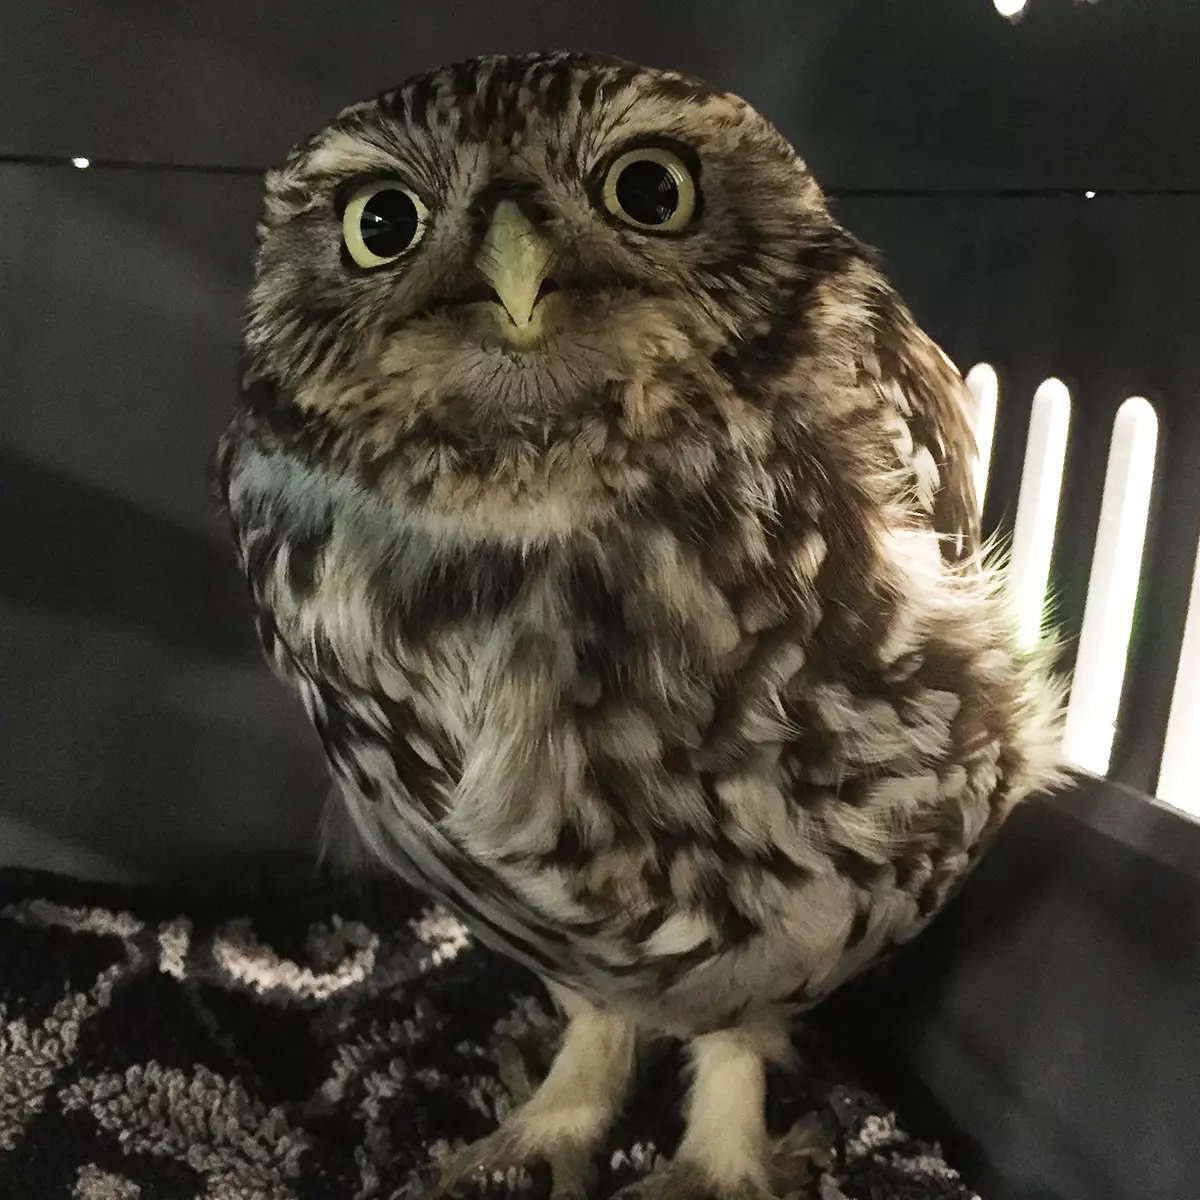 Head Falconer Rufus Samkin believes the owl was feasting on mice and voles during the mild winter (